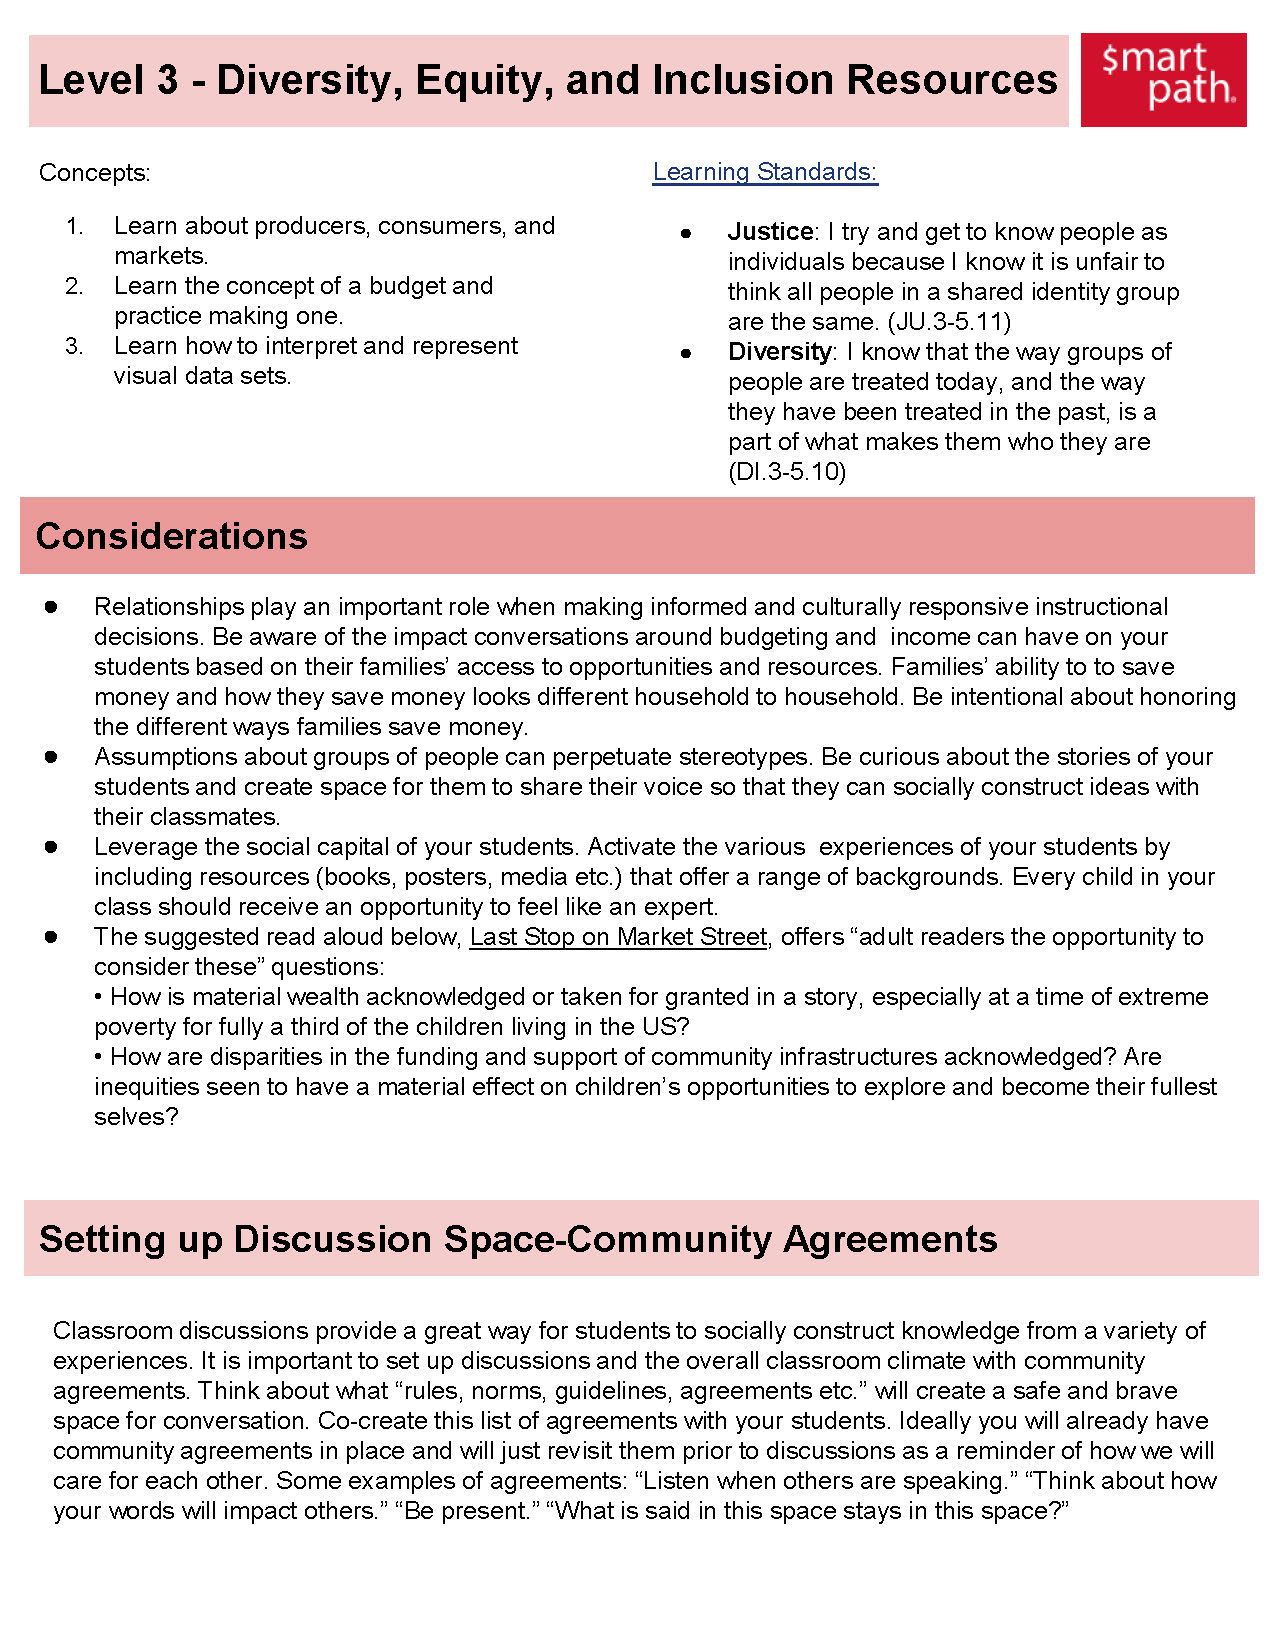 Level Three Diversity and Inclusion Resources_Page_1